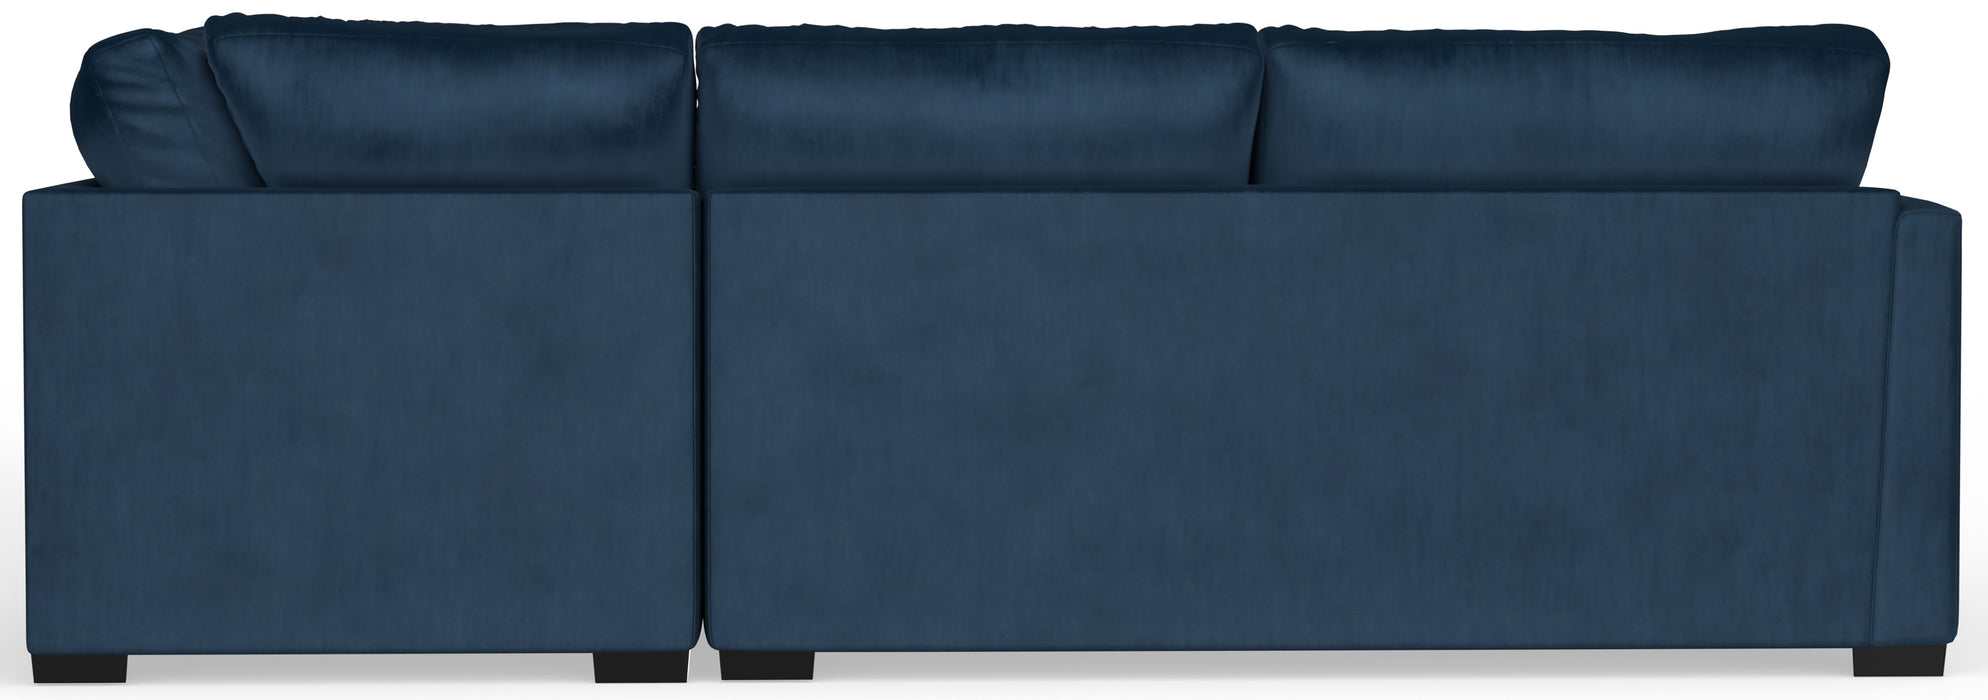 Jetson - Sectional And Included Accent Pillows